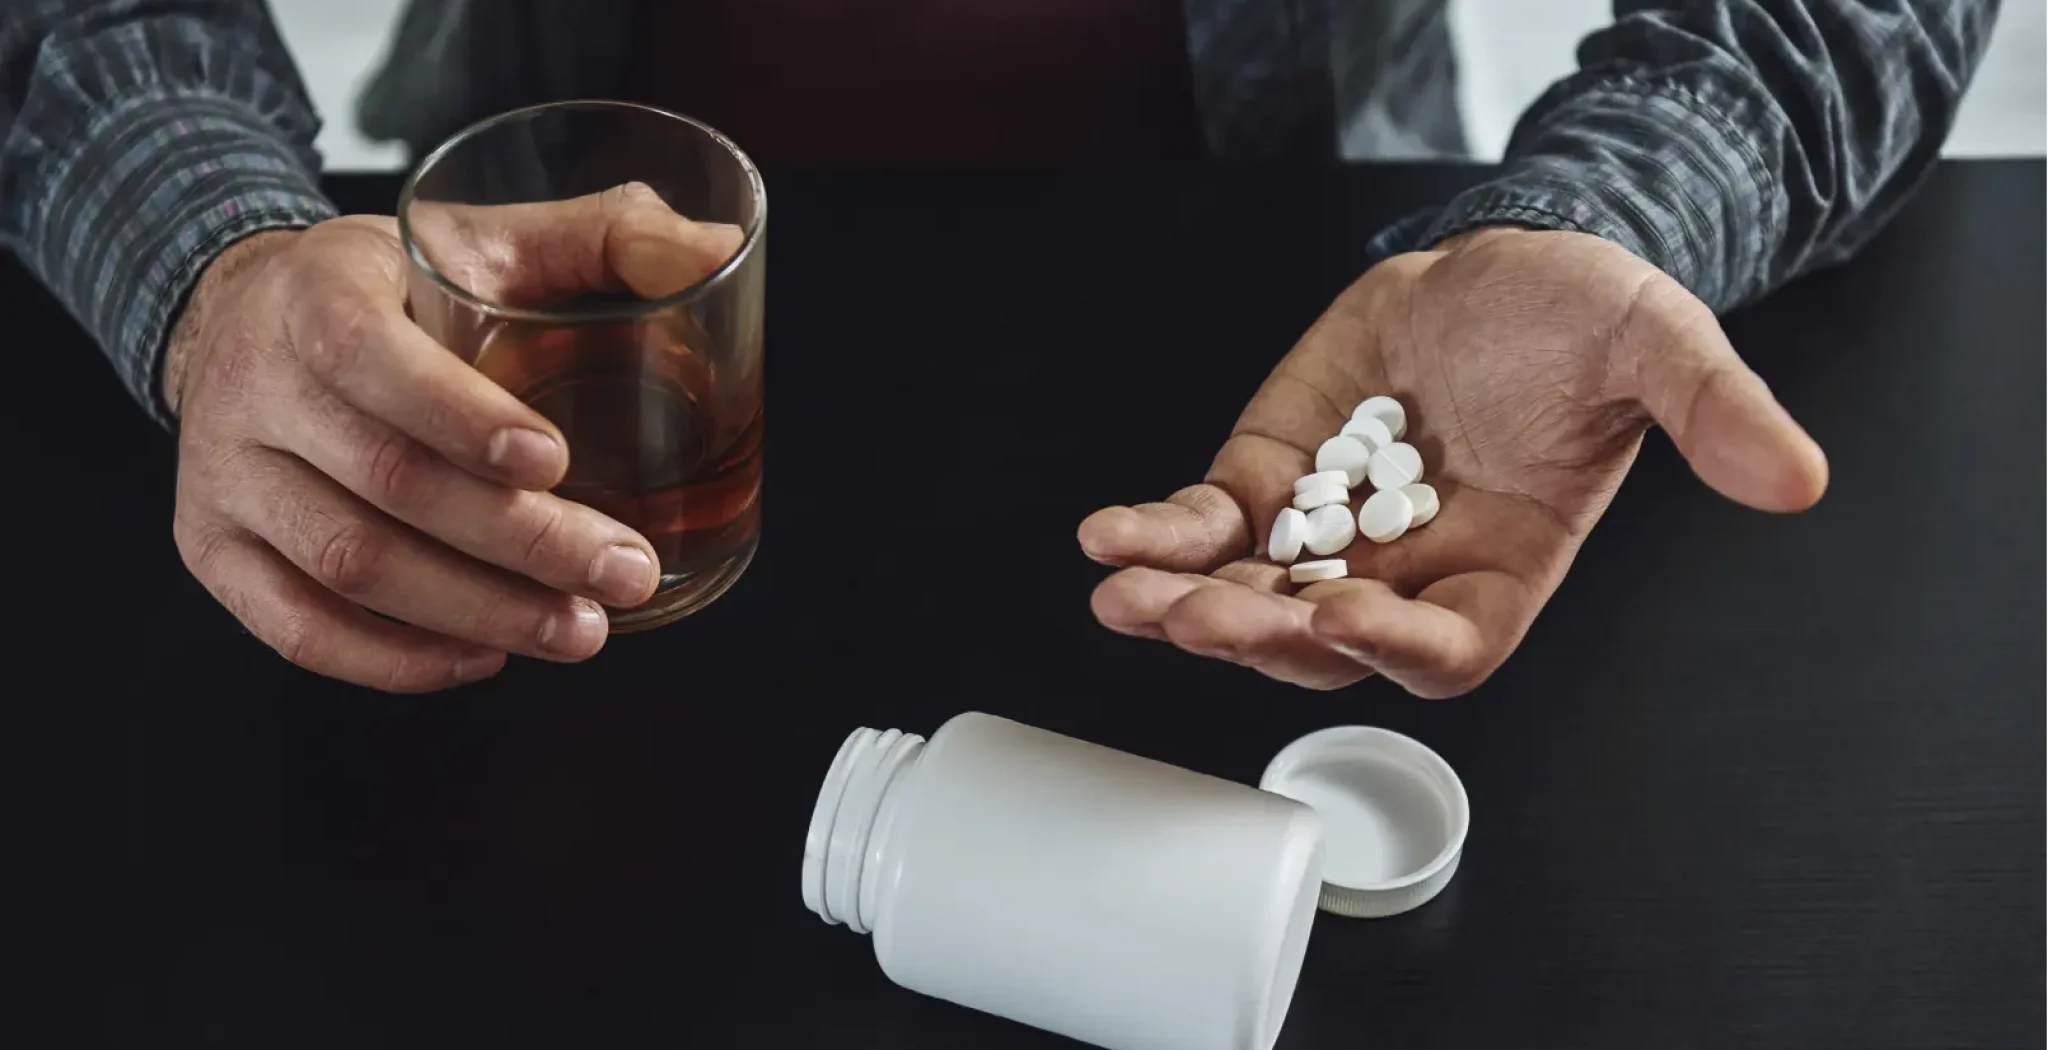 person holding a drink and pills